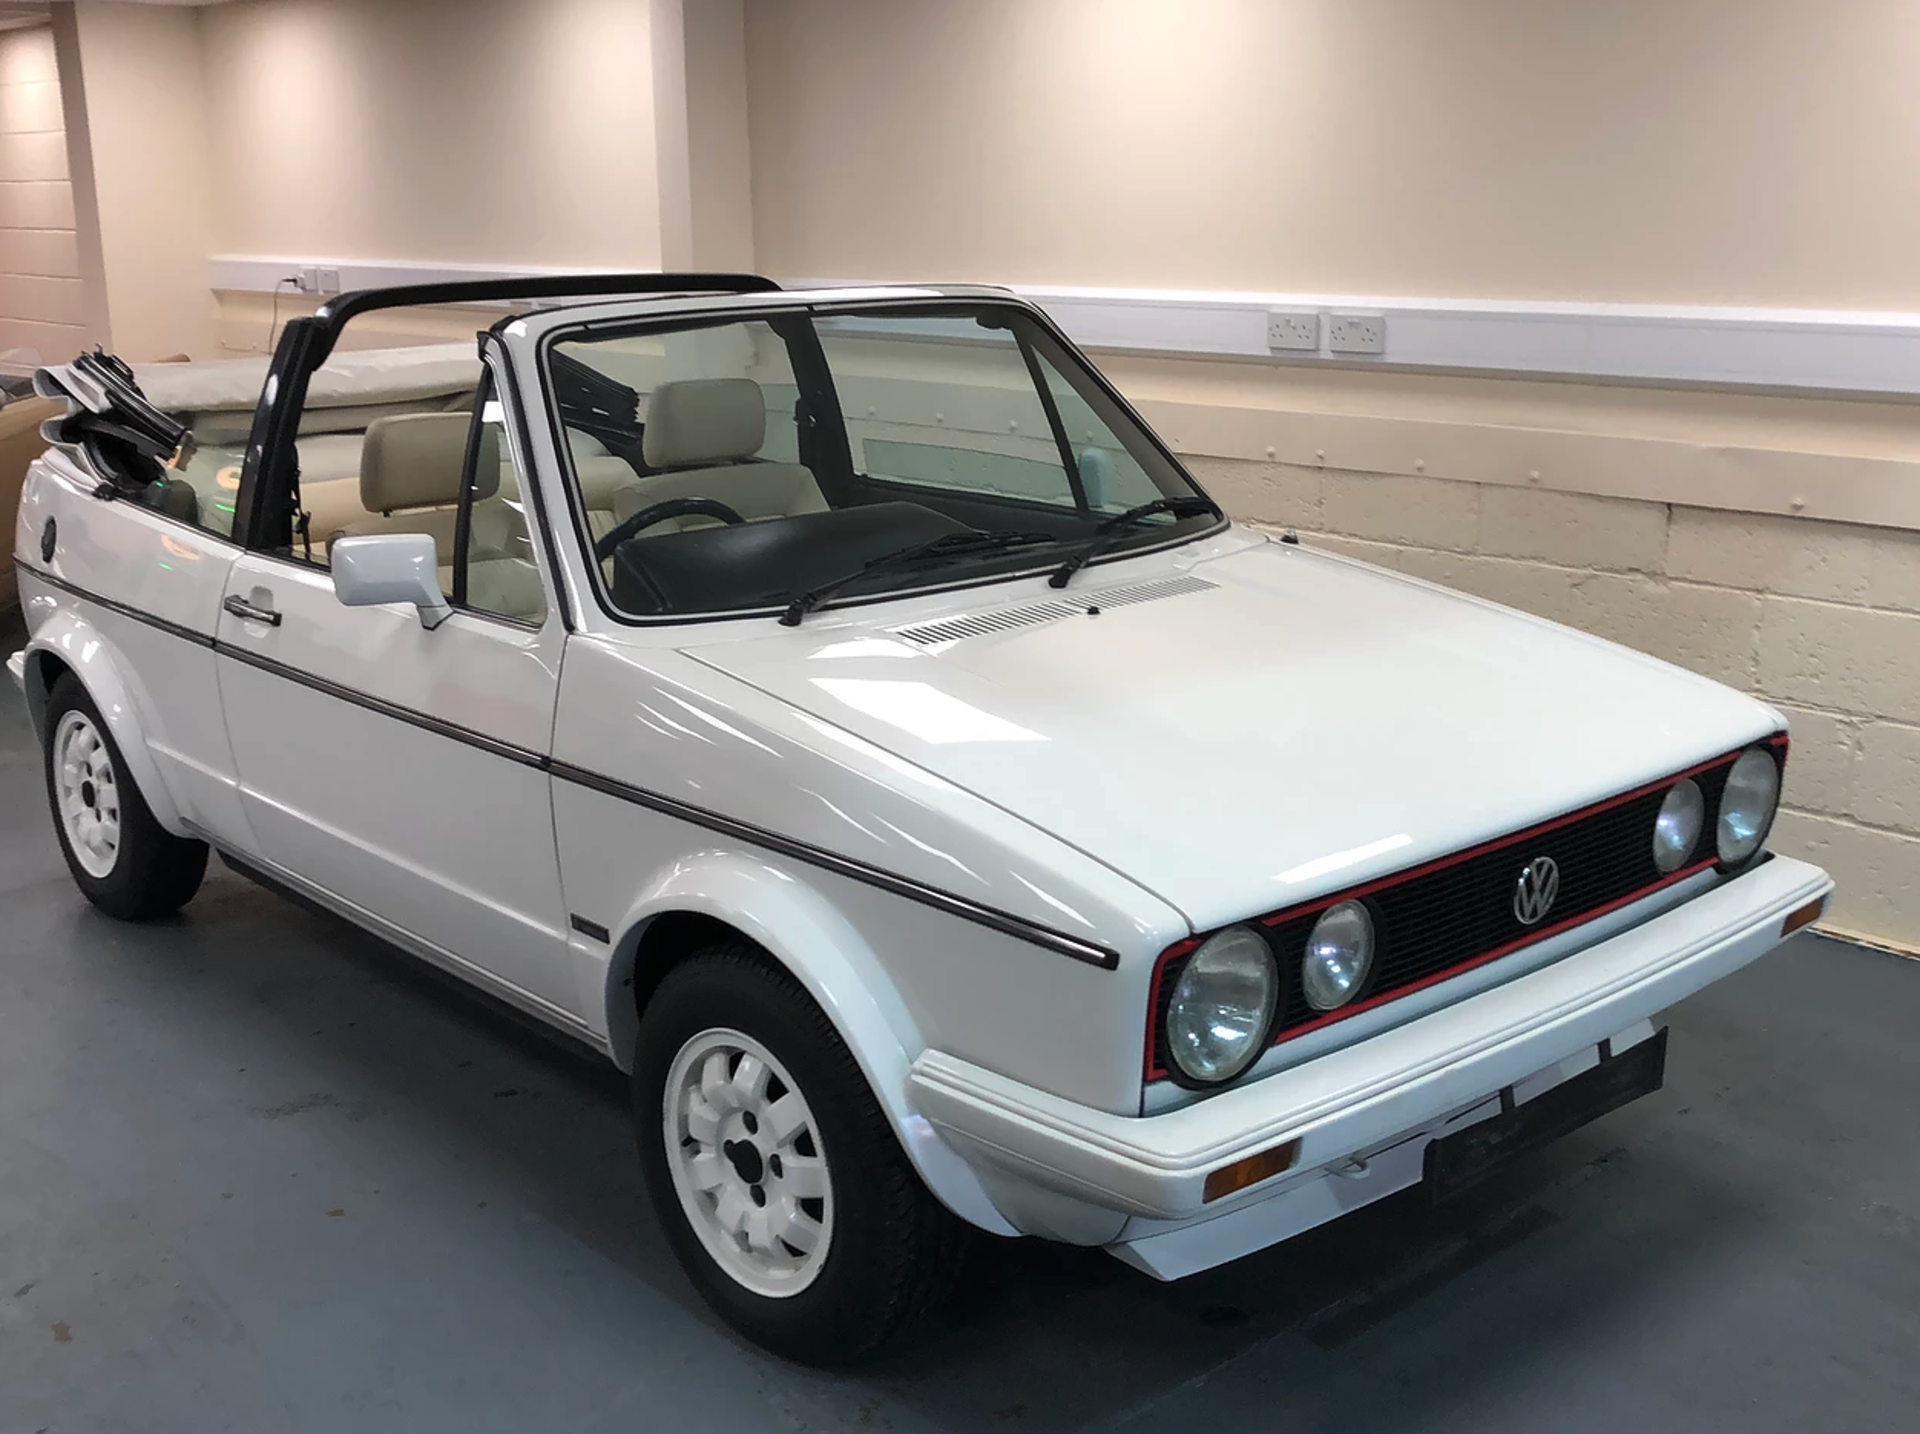 1984 Golf GTI MK1 Convertible - Very low miles & only 3 previous owners.